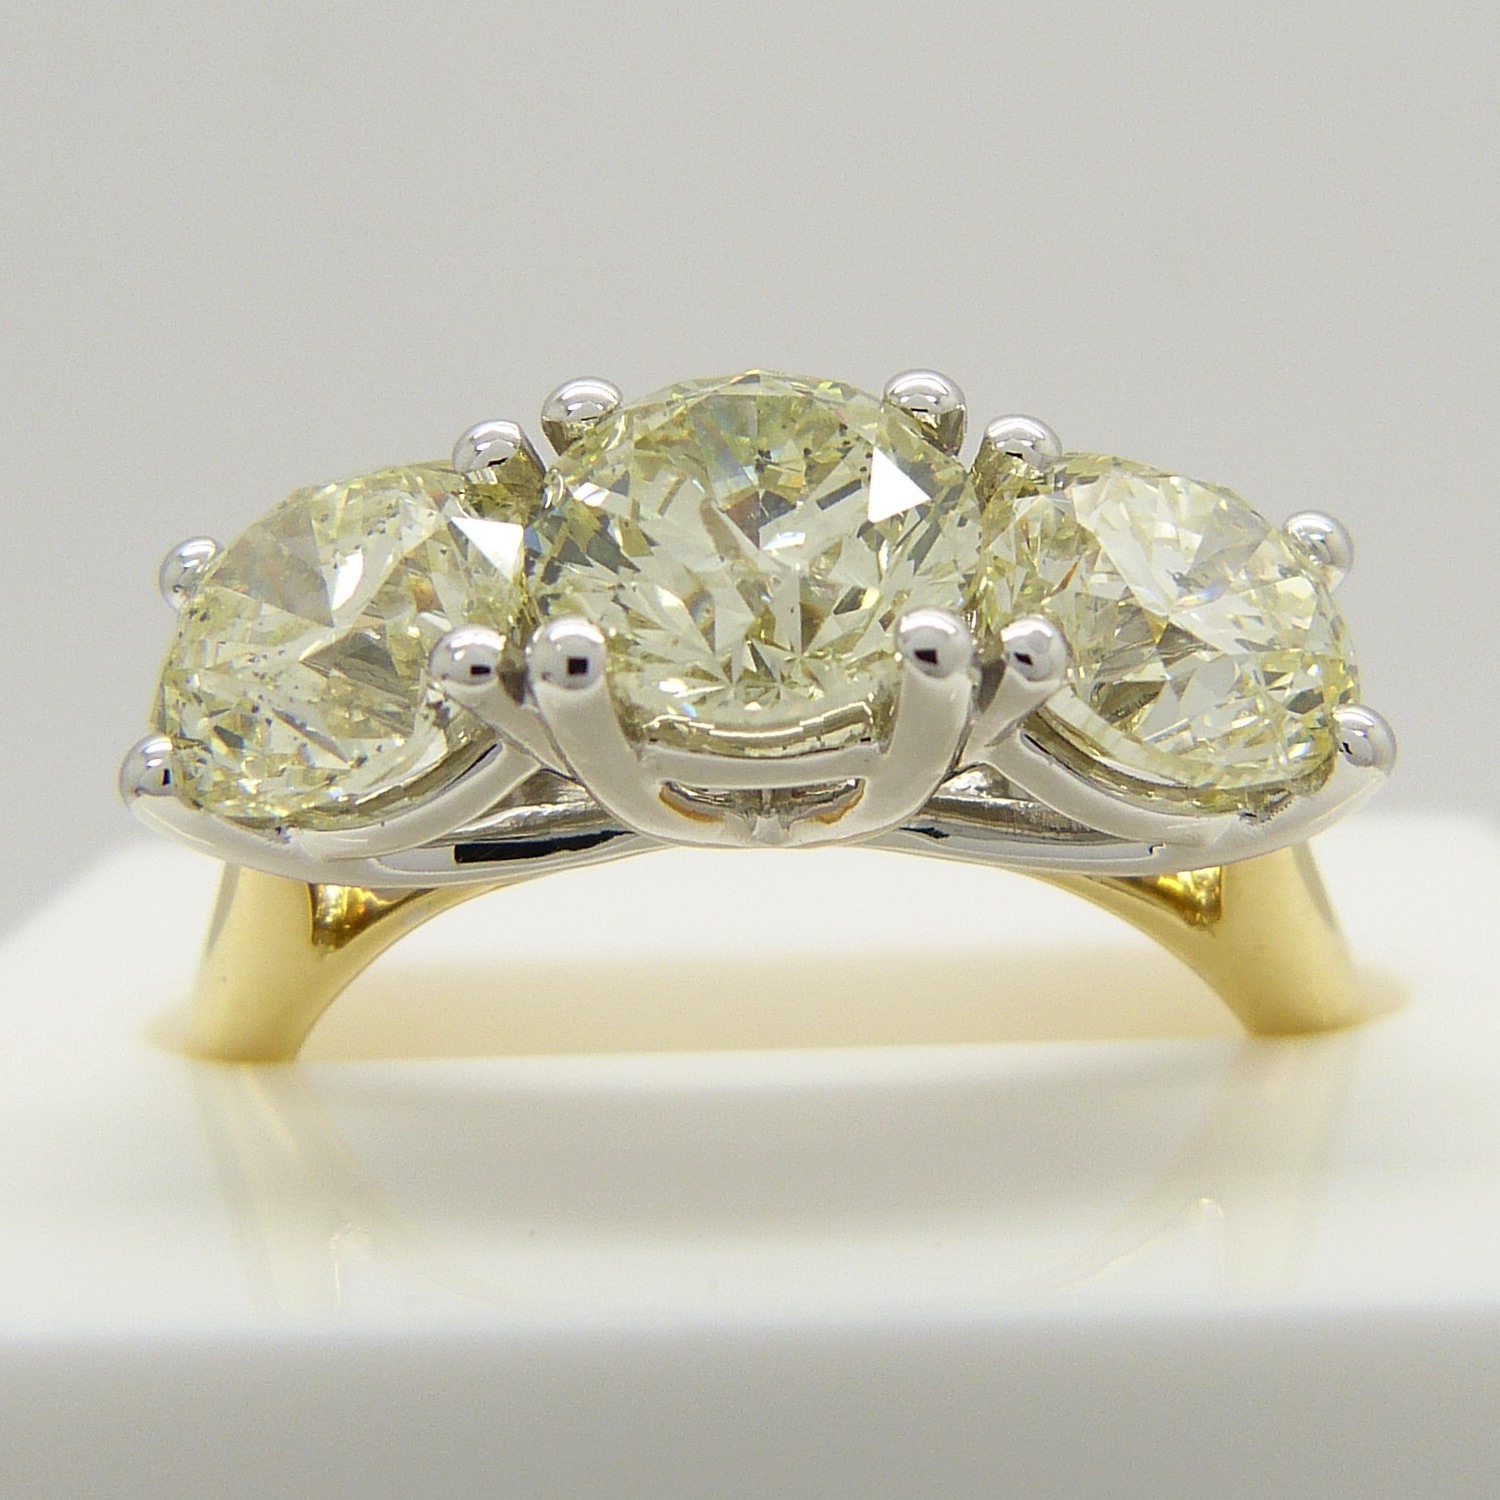 A stunning WGI certificated 3.11 carat diamond 3-stone ring in 18ct yellow and white gold - Image 4 of 8